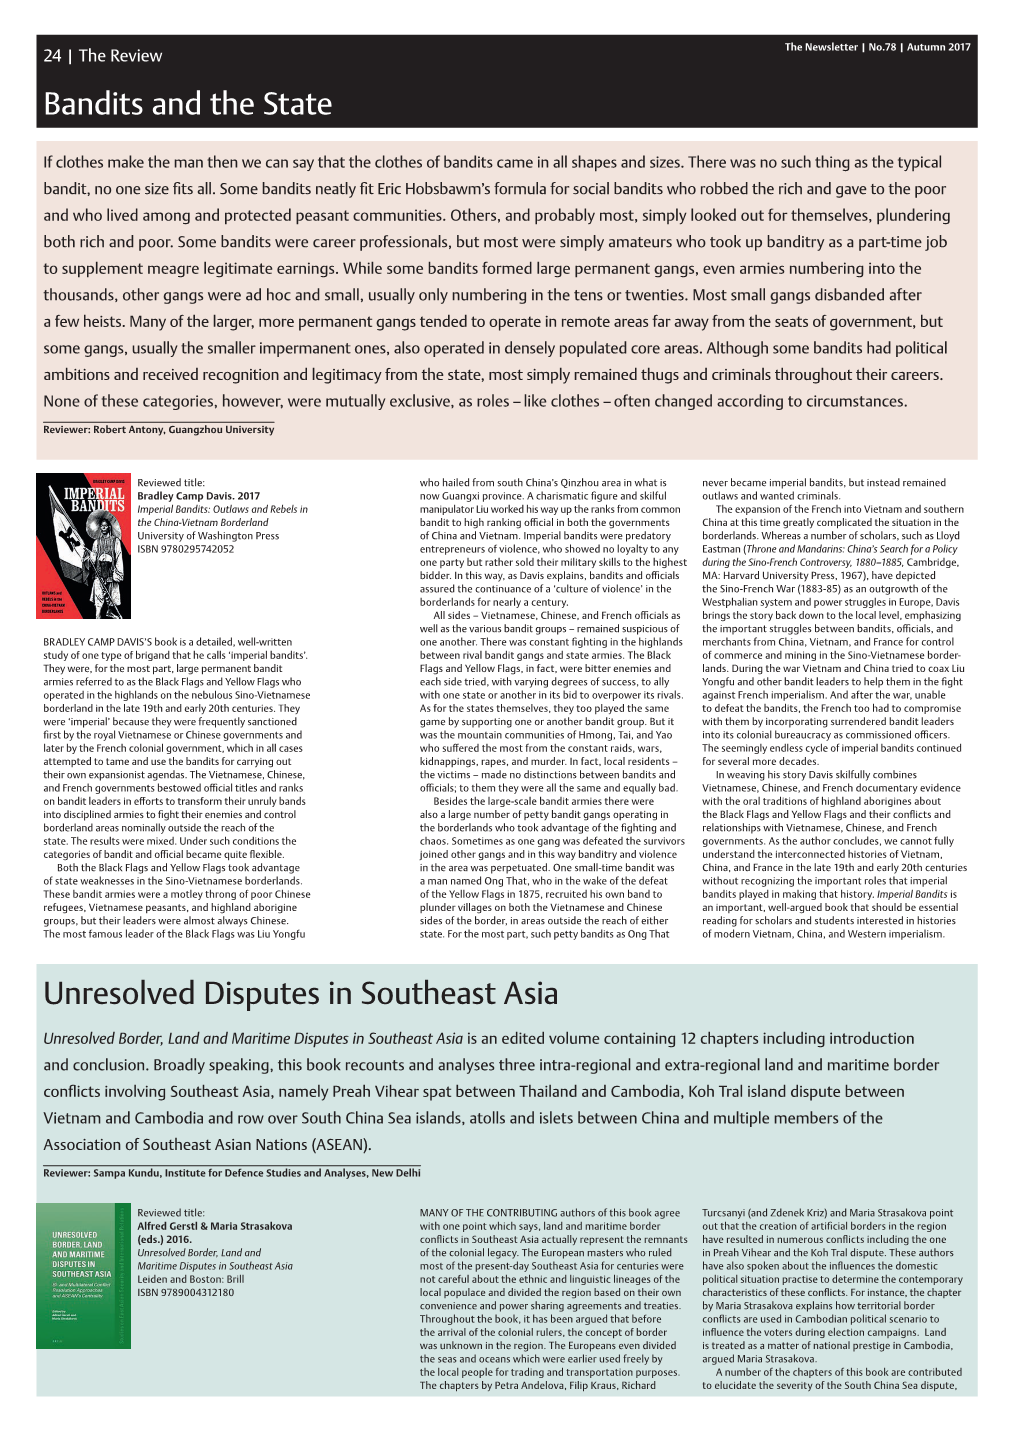 Bandits and the State Unresolved Disputes in Southeast Asia